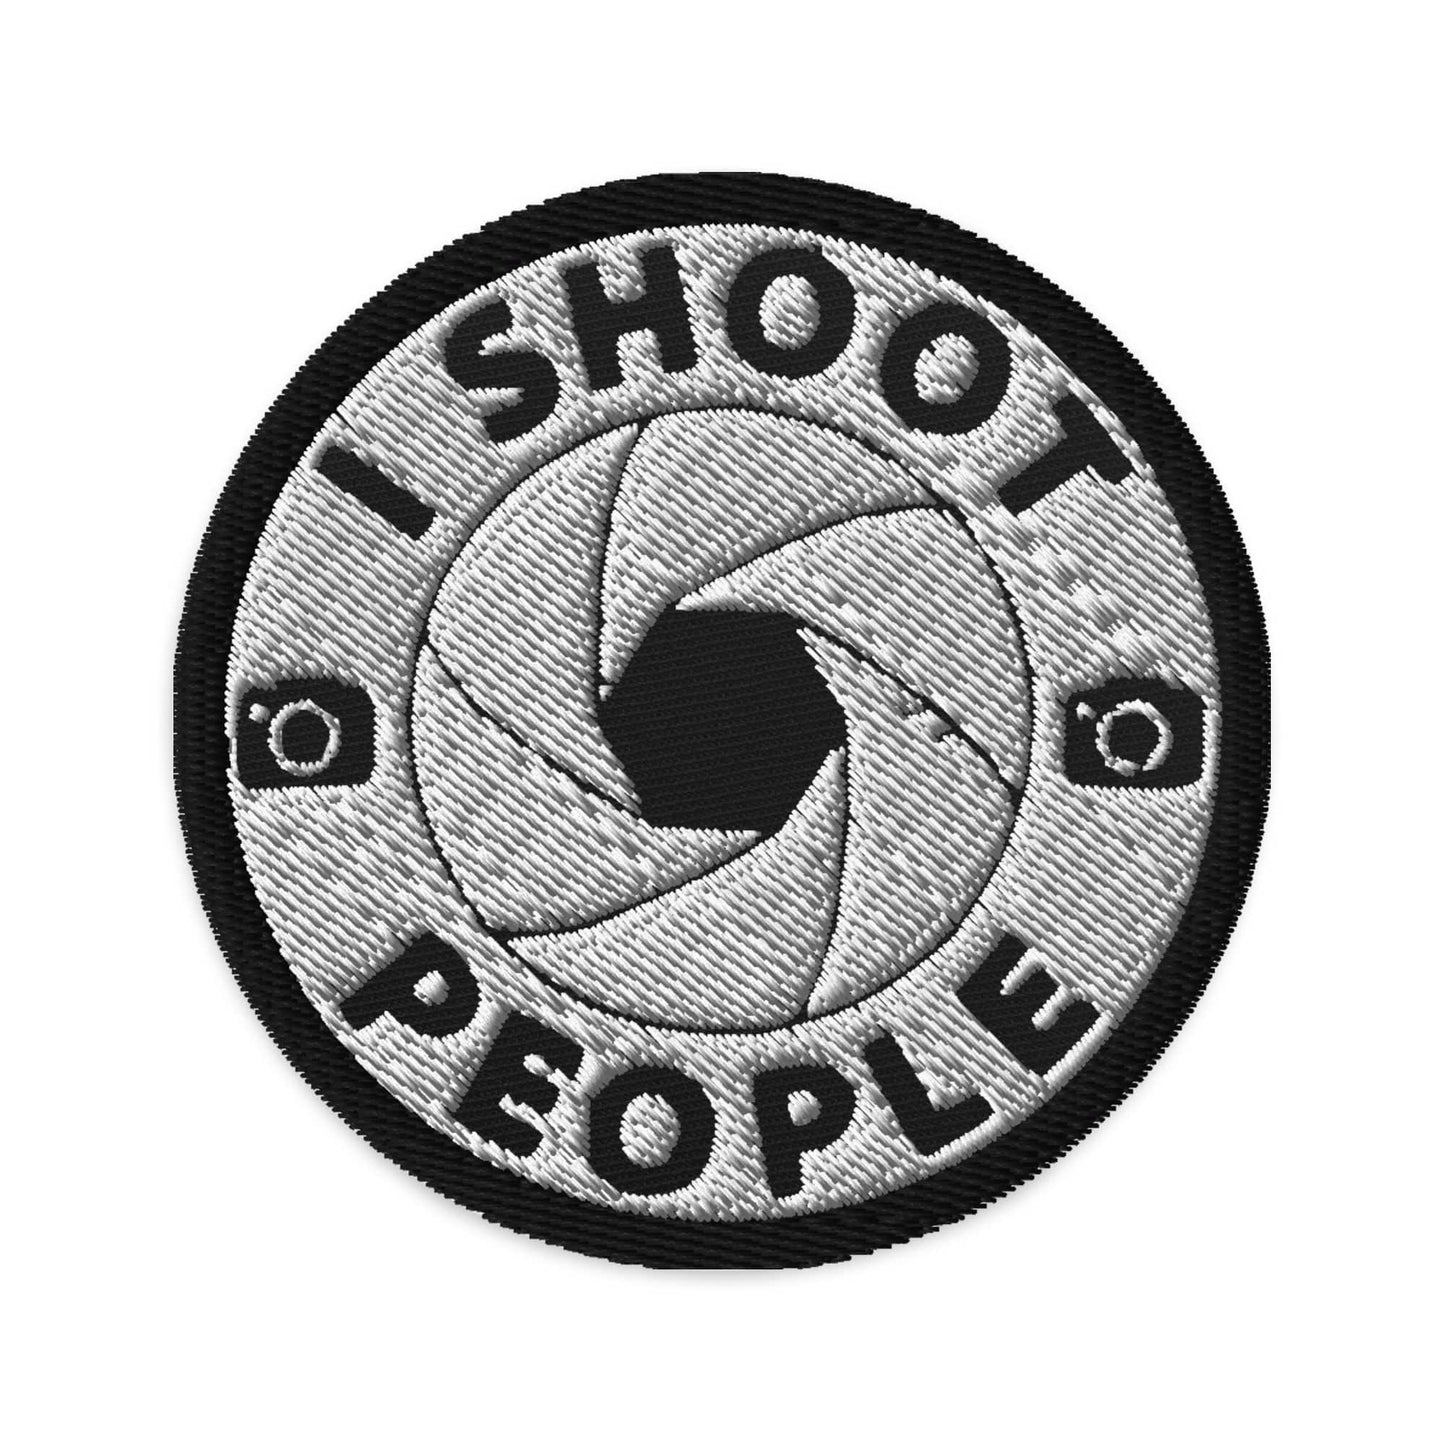 Production Apparel I Shoot People Patch Black